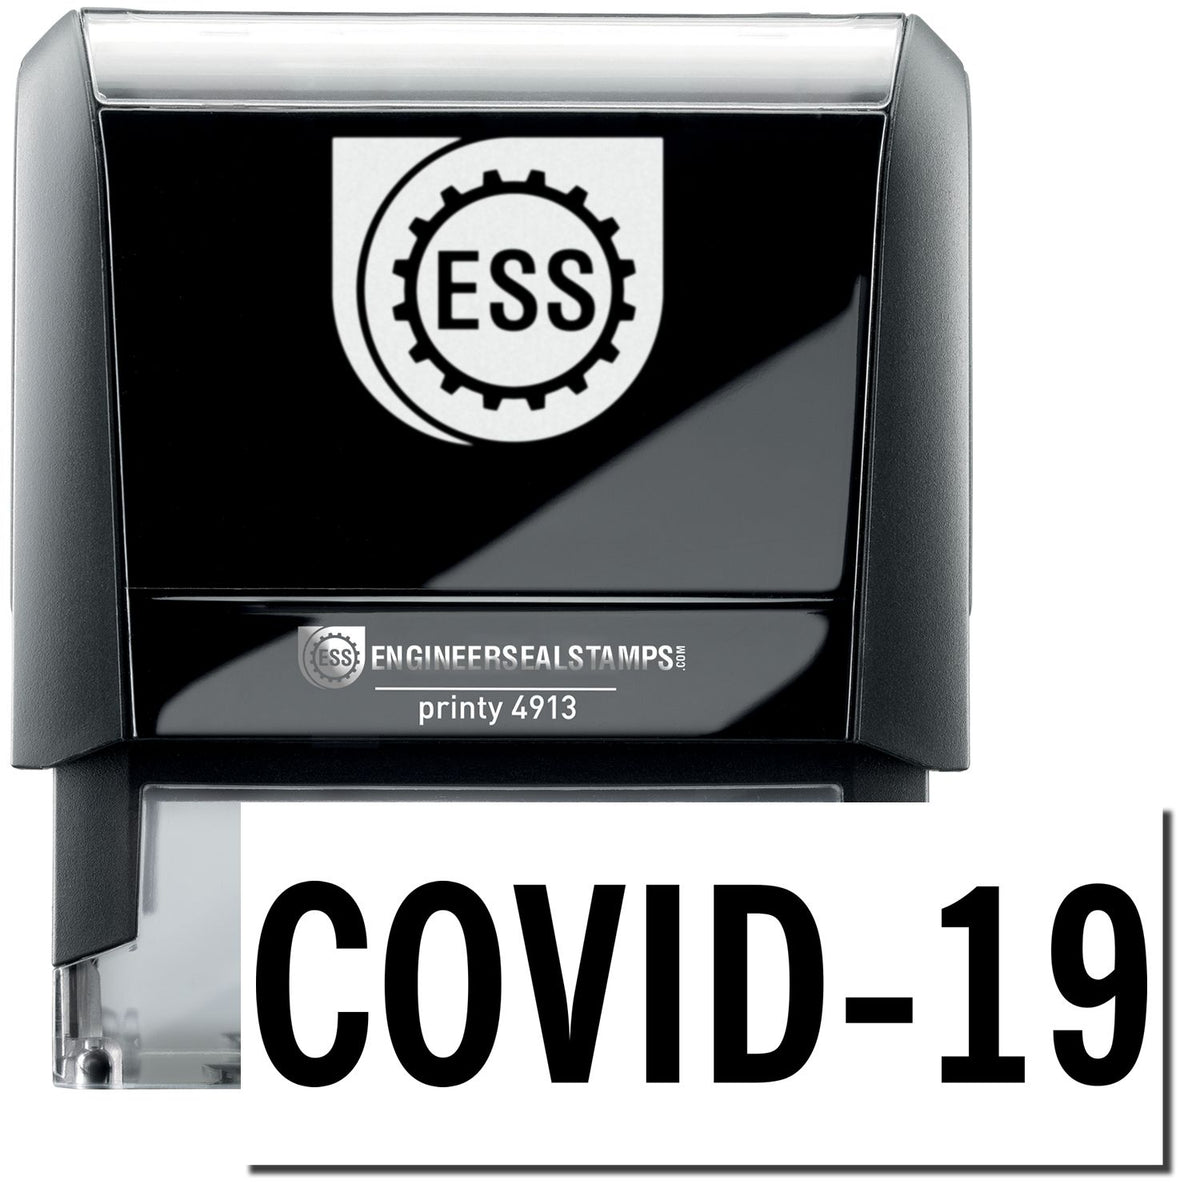 A self-inking stamp with a stamped image showing how the text &quot;COVID-19&quot; in a large bold font is displayed by it after stamping.